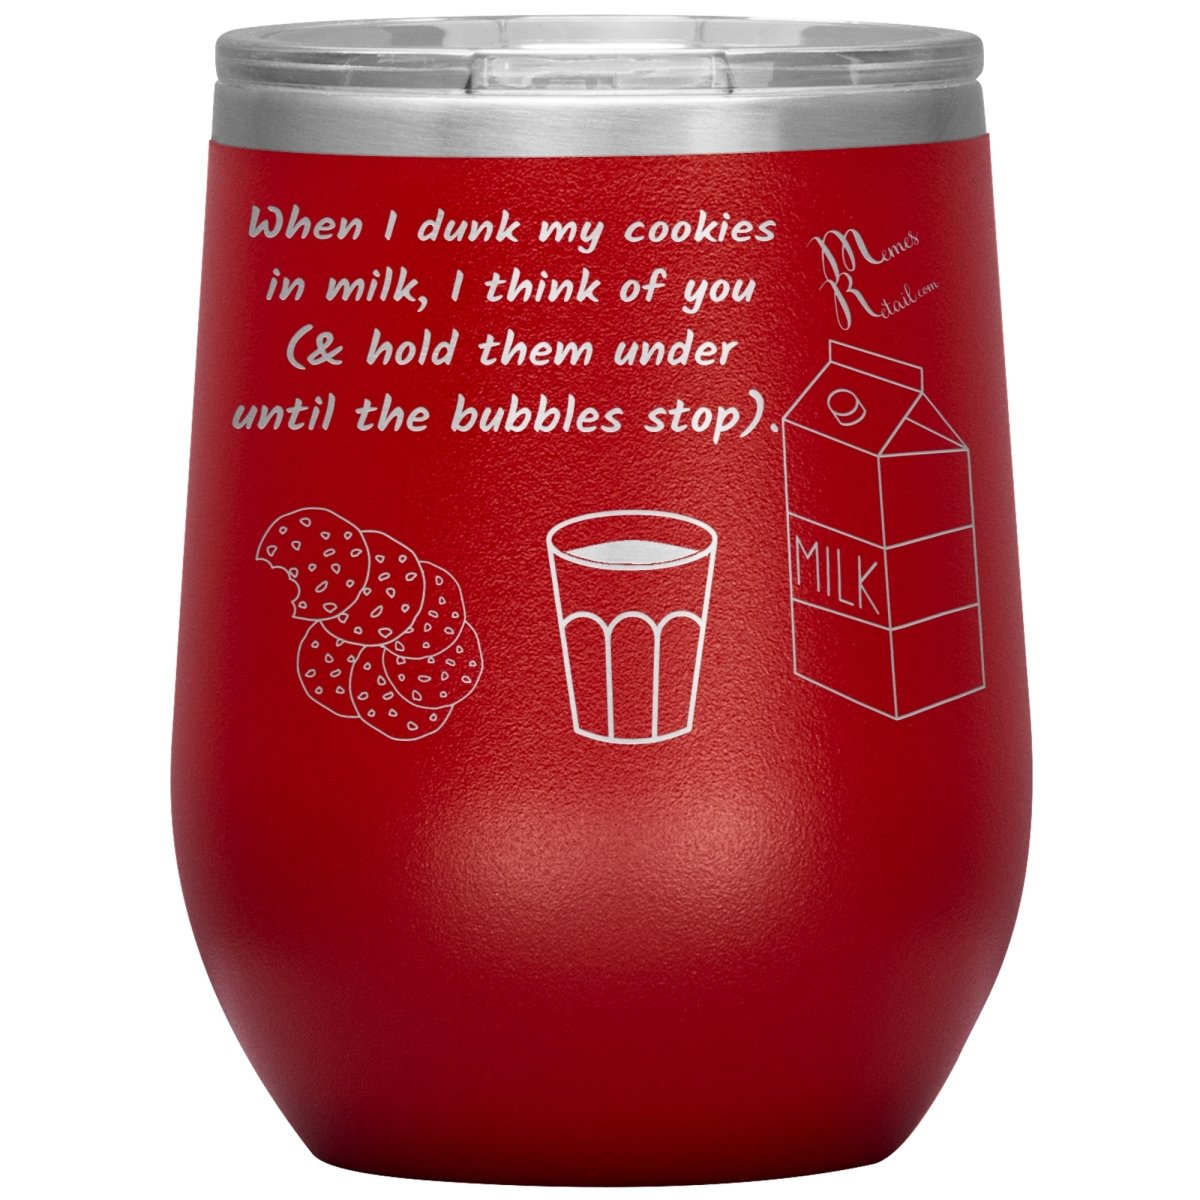 When I dunk My Cookies in Milk, I think of You - Tumblers, 12oz Wine Insulated Tumbler / Red - MemesRetail.com